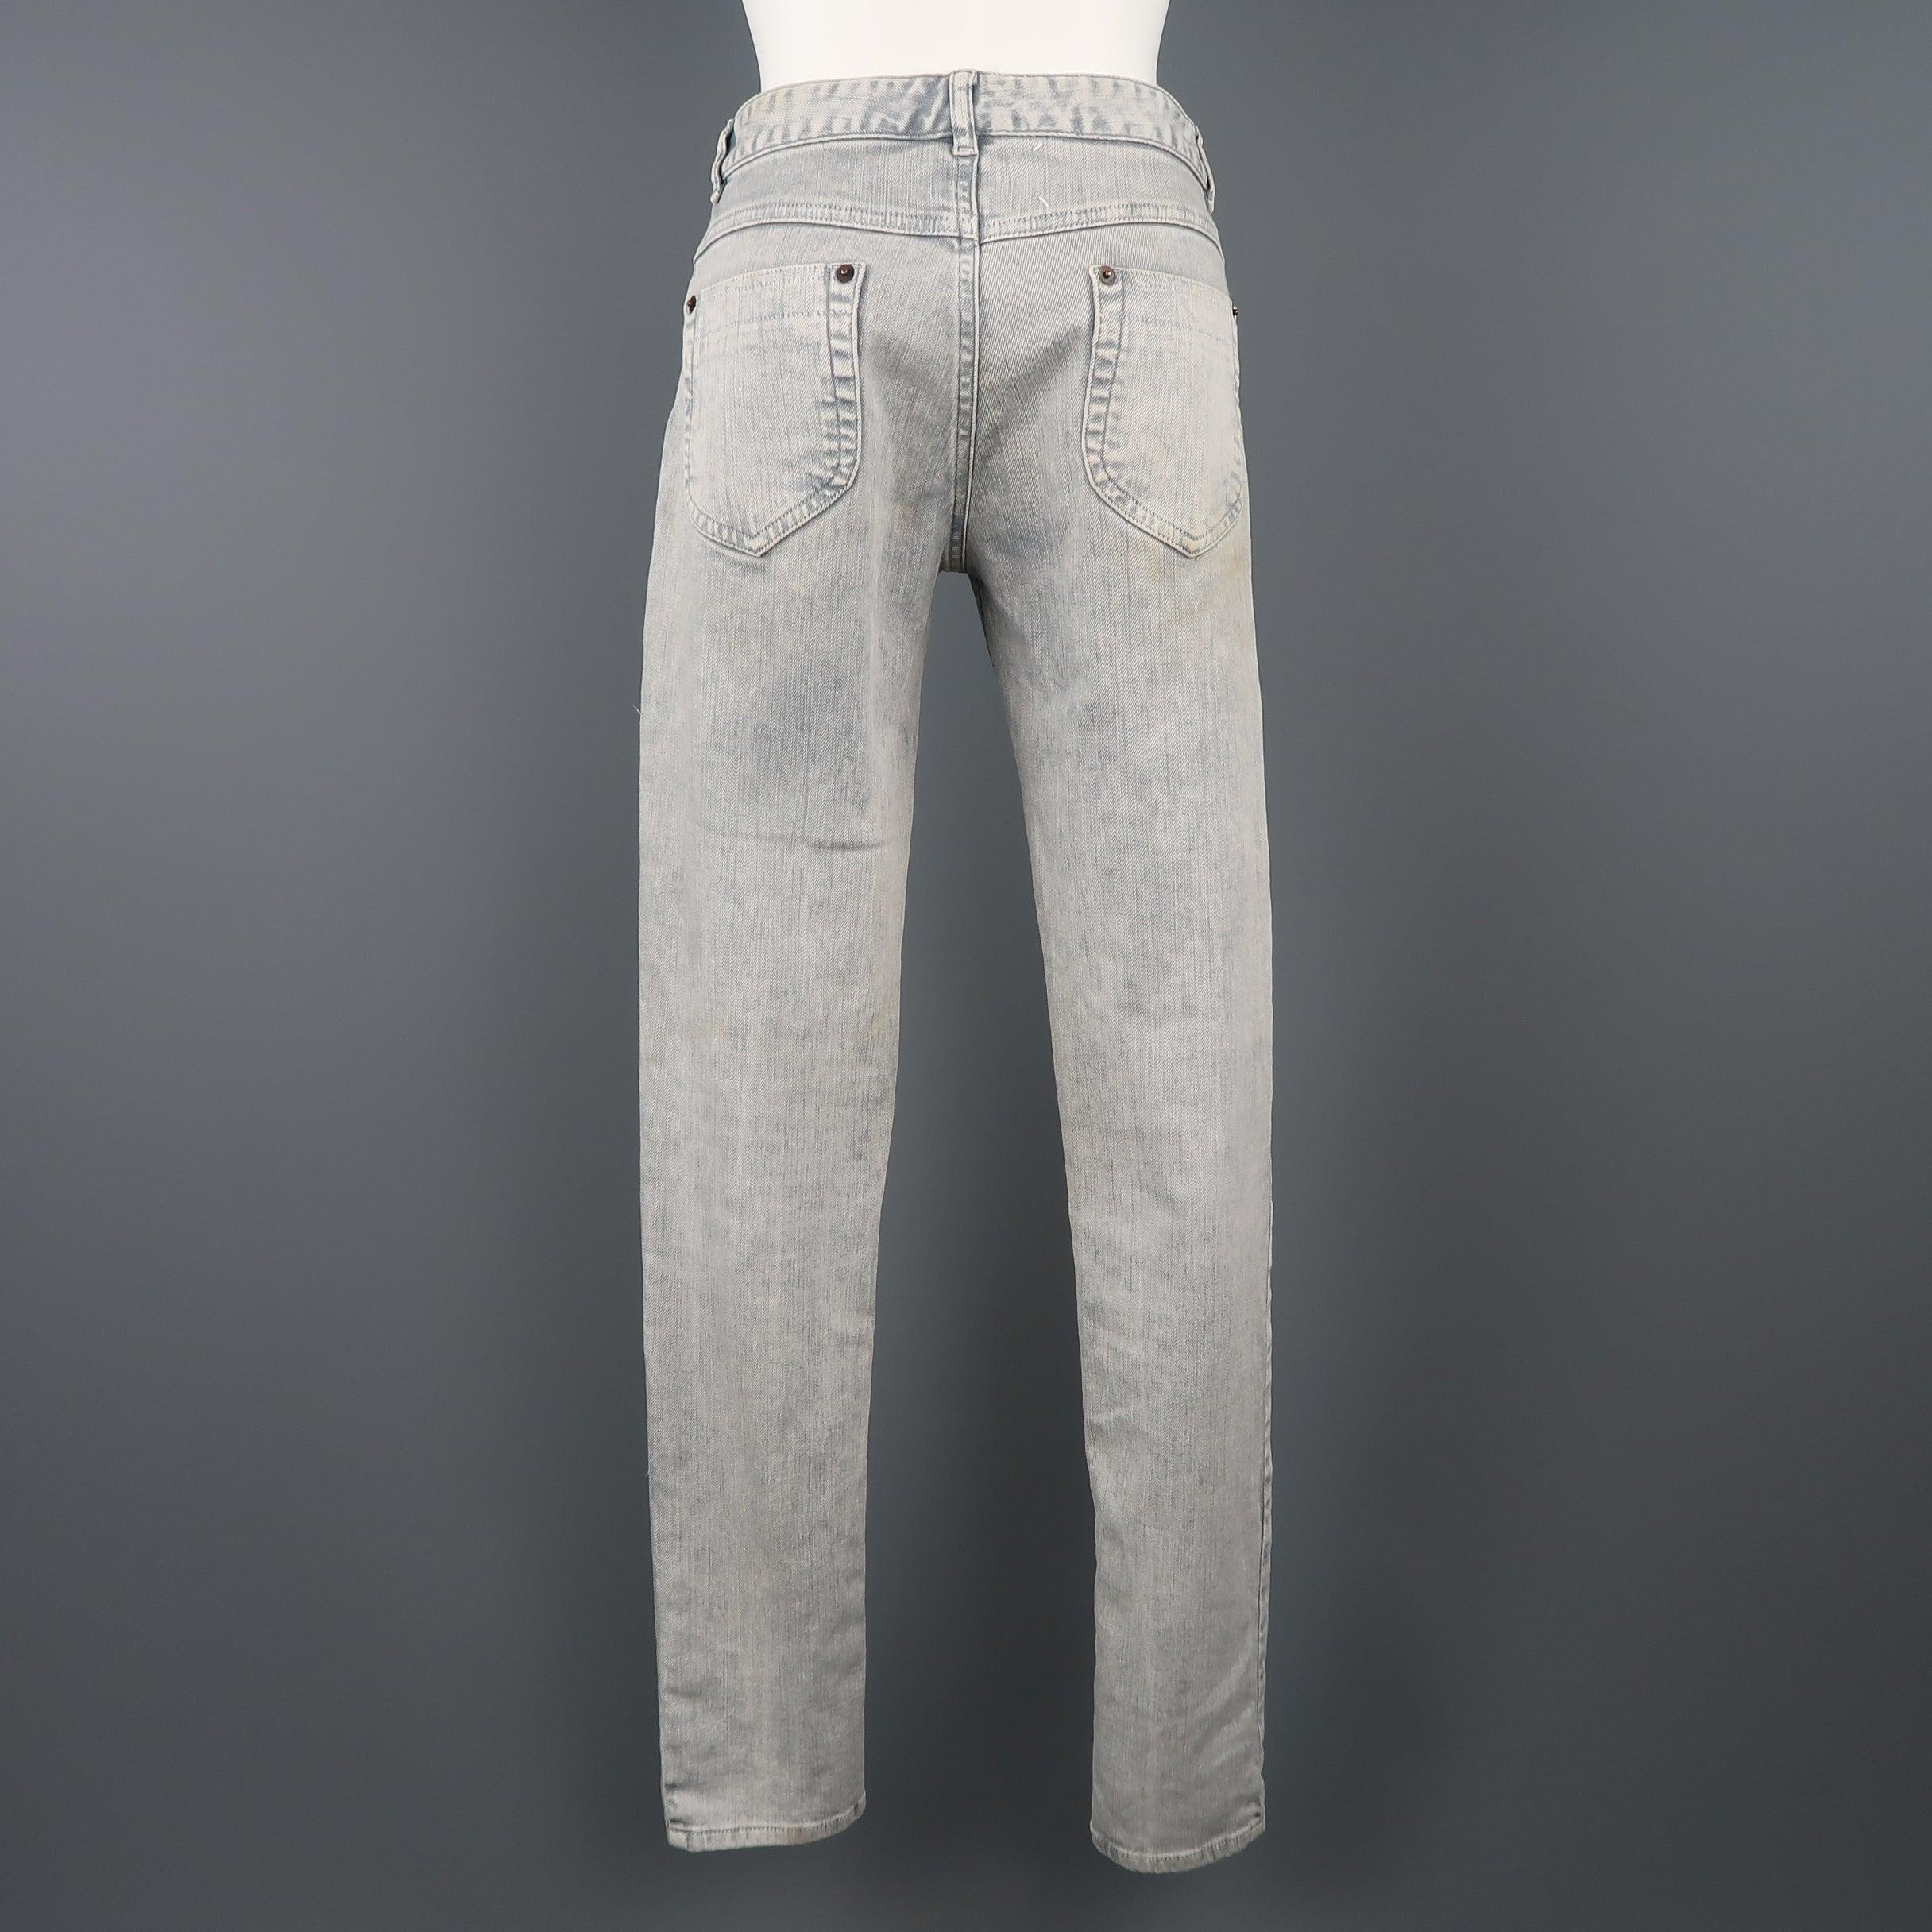 MAISON MARTIN MARGIELA jeans come in a light gray acid wash stretch denim with a narrow leg. Discolorations throughout and tag stitches undone. As-is. Made in Italy.
Fair Pre-Owned Condition.
 

Marked:   IT 42
 

Measurements: 
  
l	Waist: 29